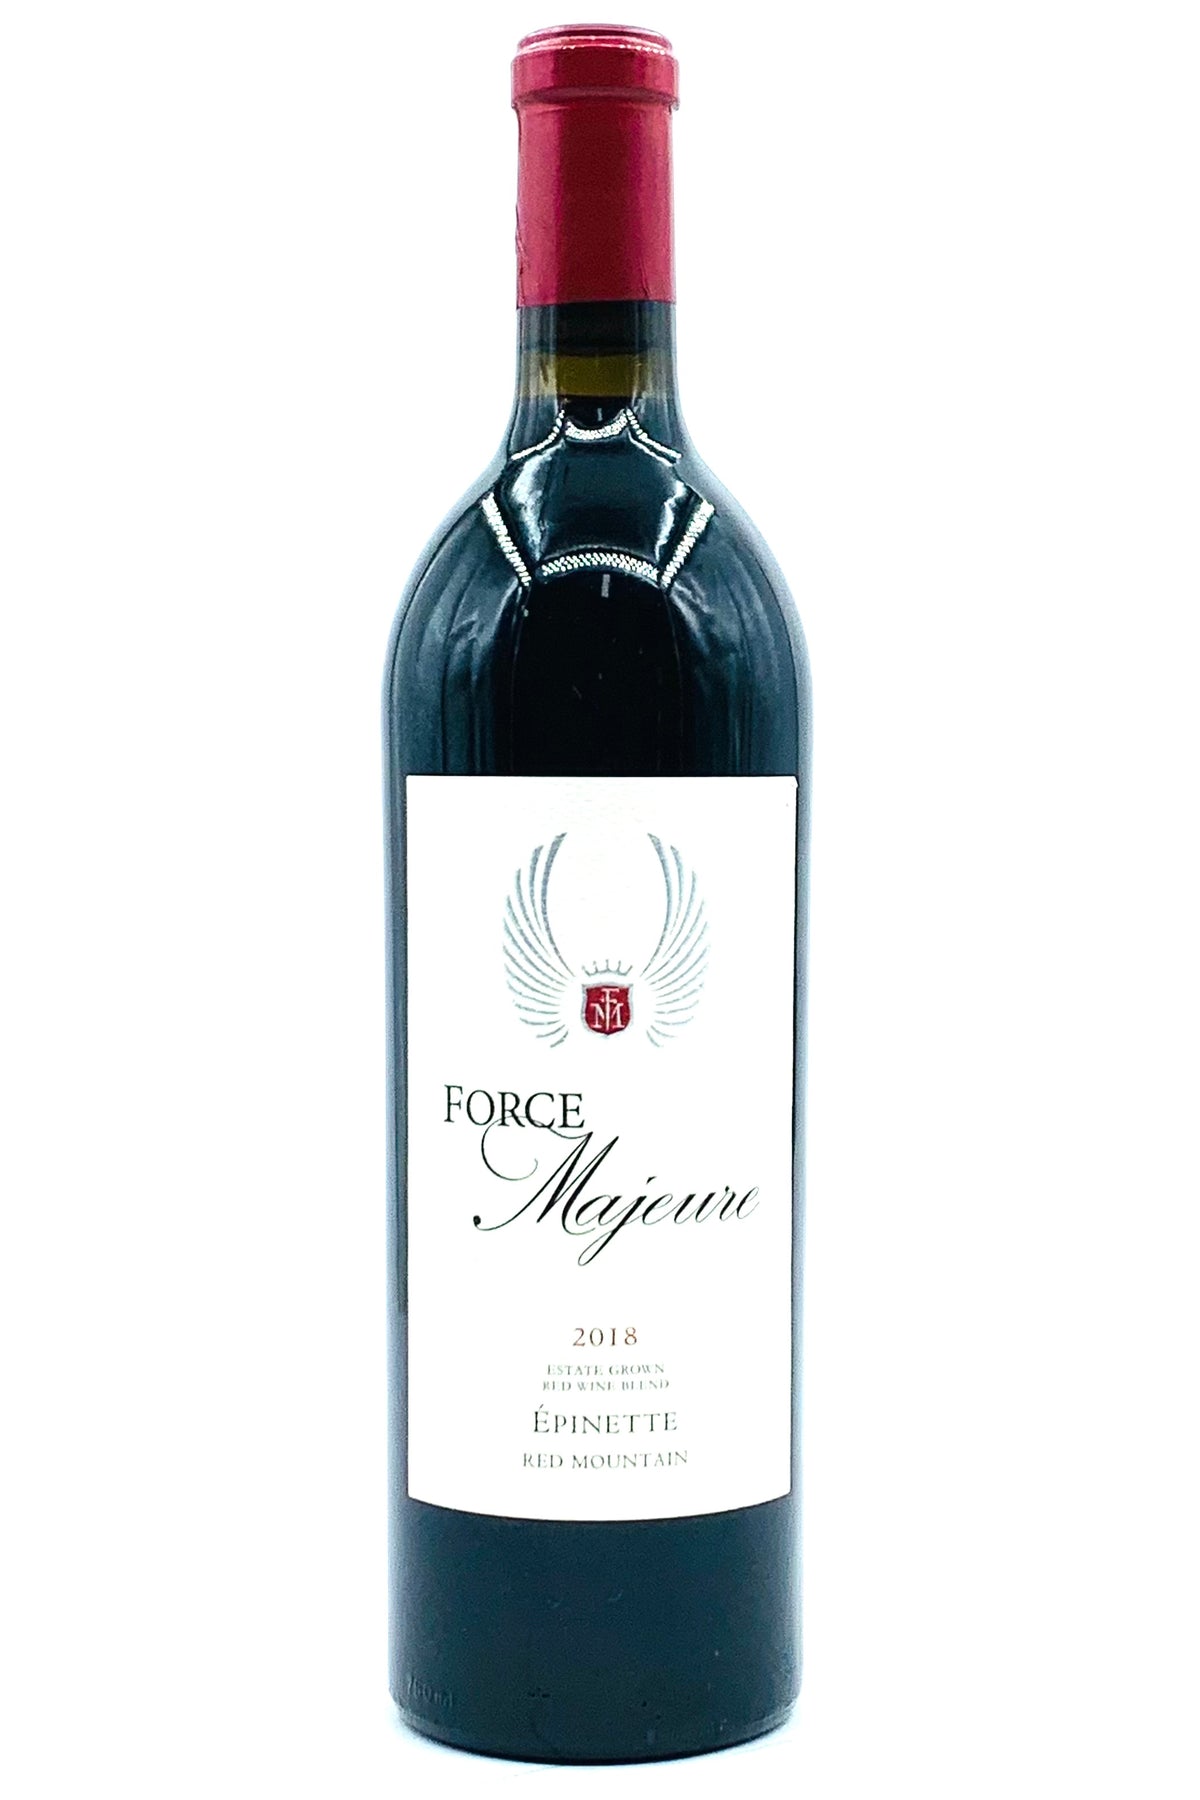 Force Majeure 2018 Epinette Red Wine